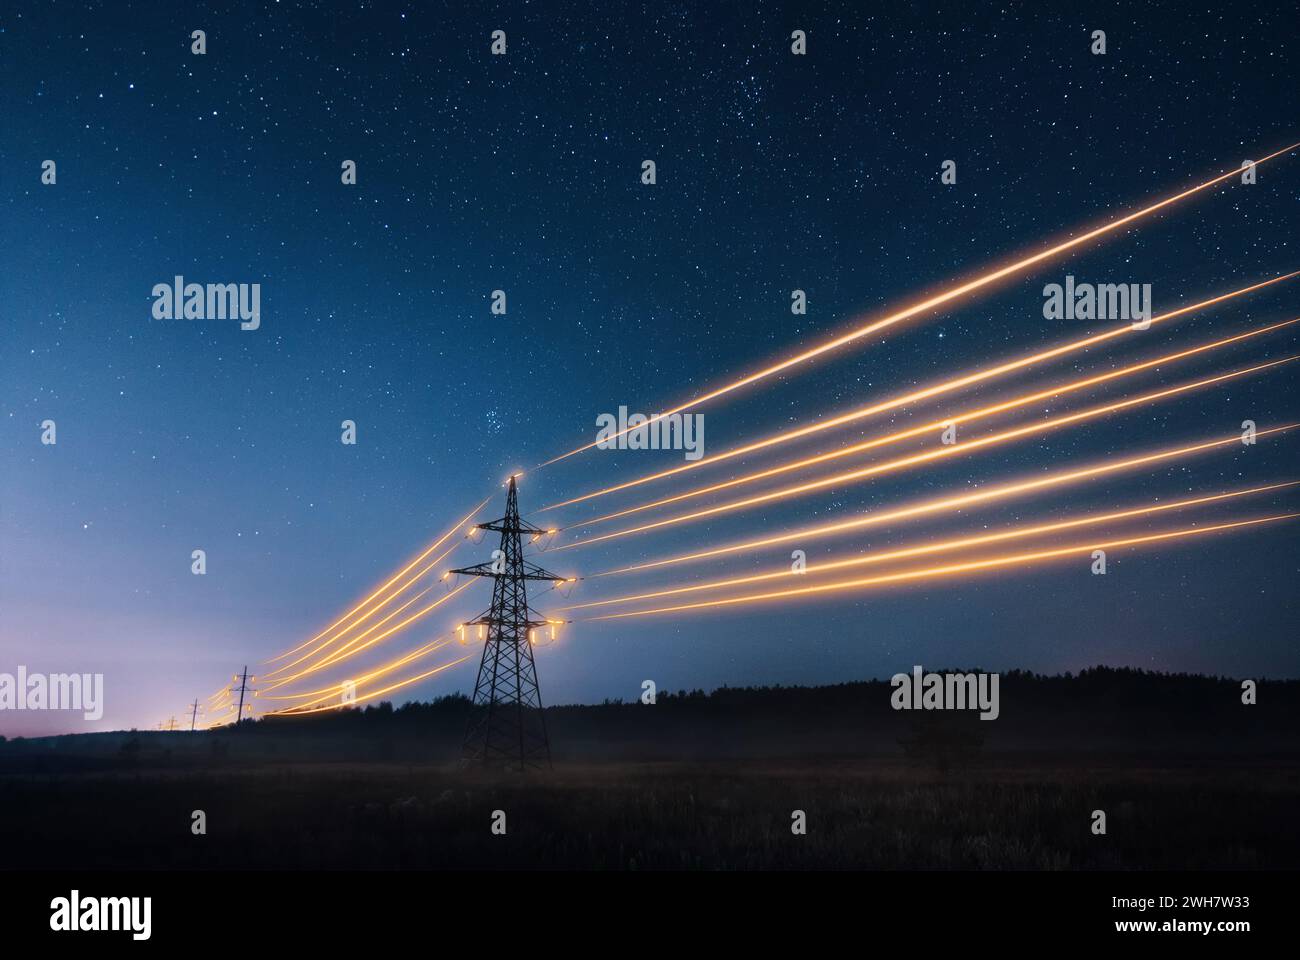 Electricity transmission towers with orange glowing wires the starry night sky. Energy infrastructure concept. Stock Photo